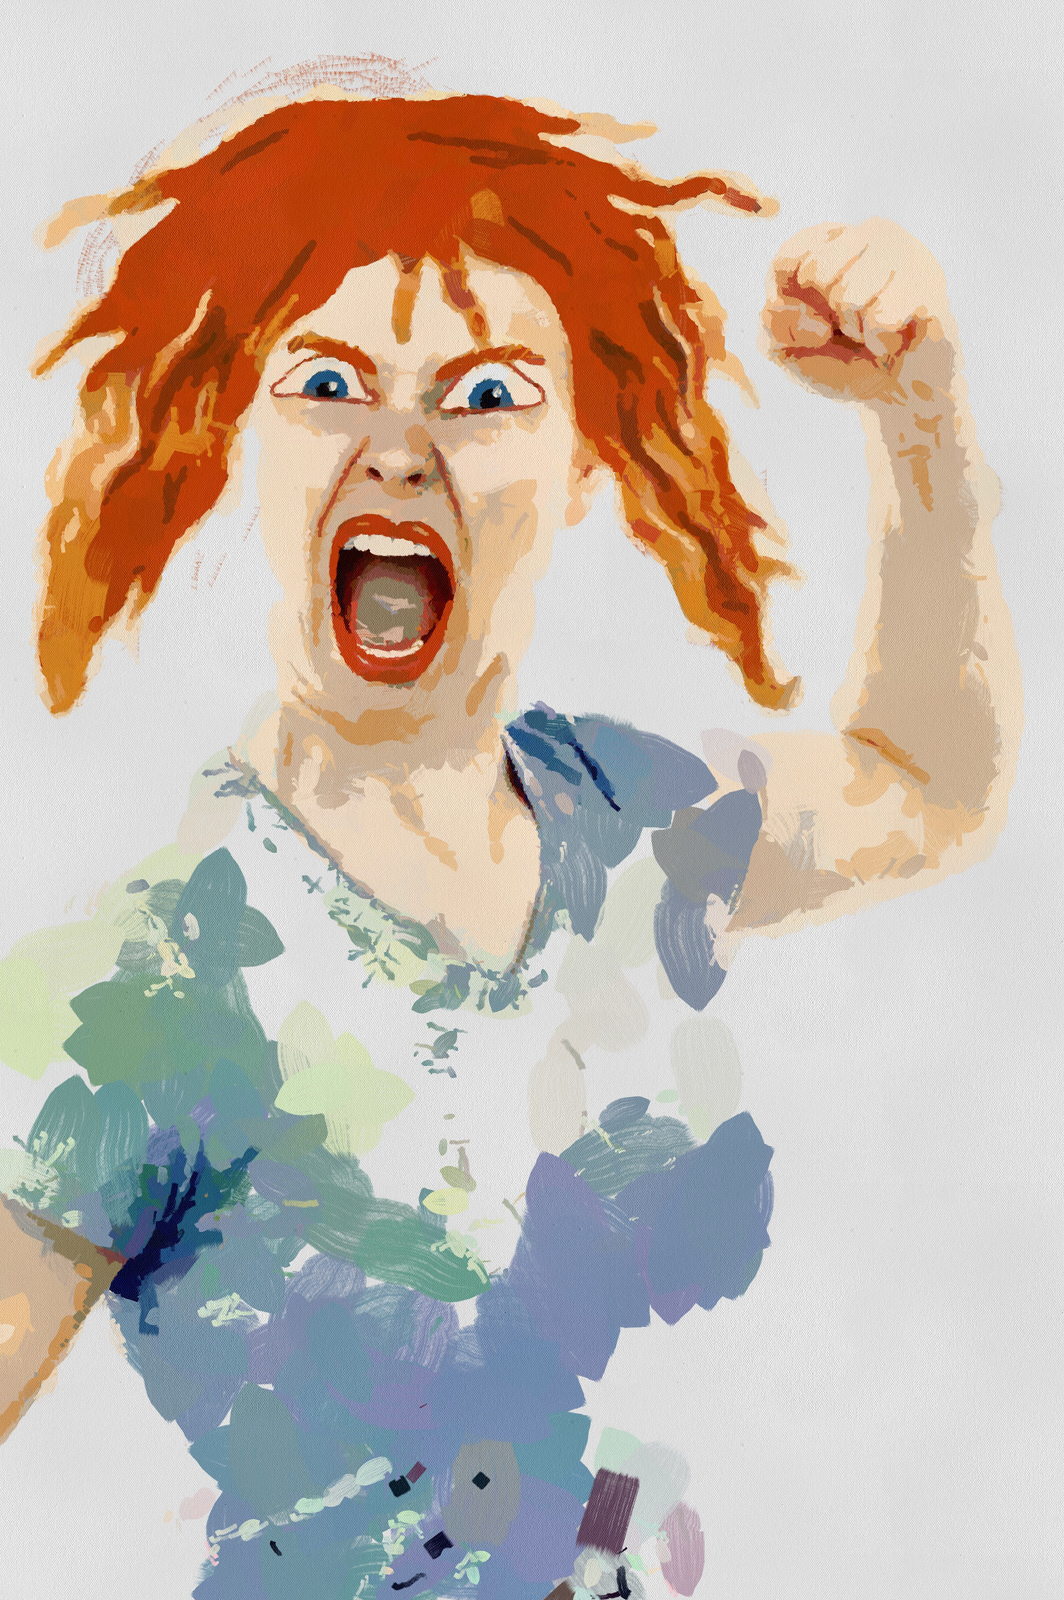 Free Stock Photo 9477 angry woman | freeimageslive